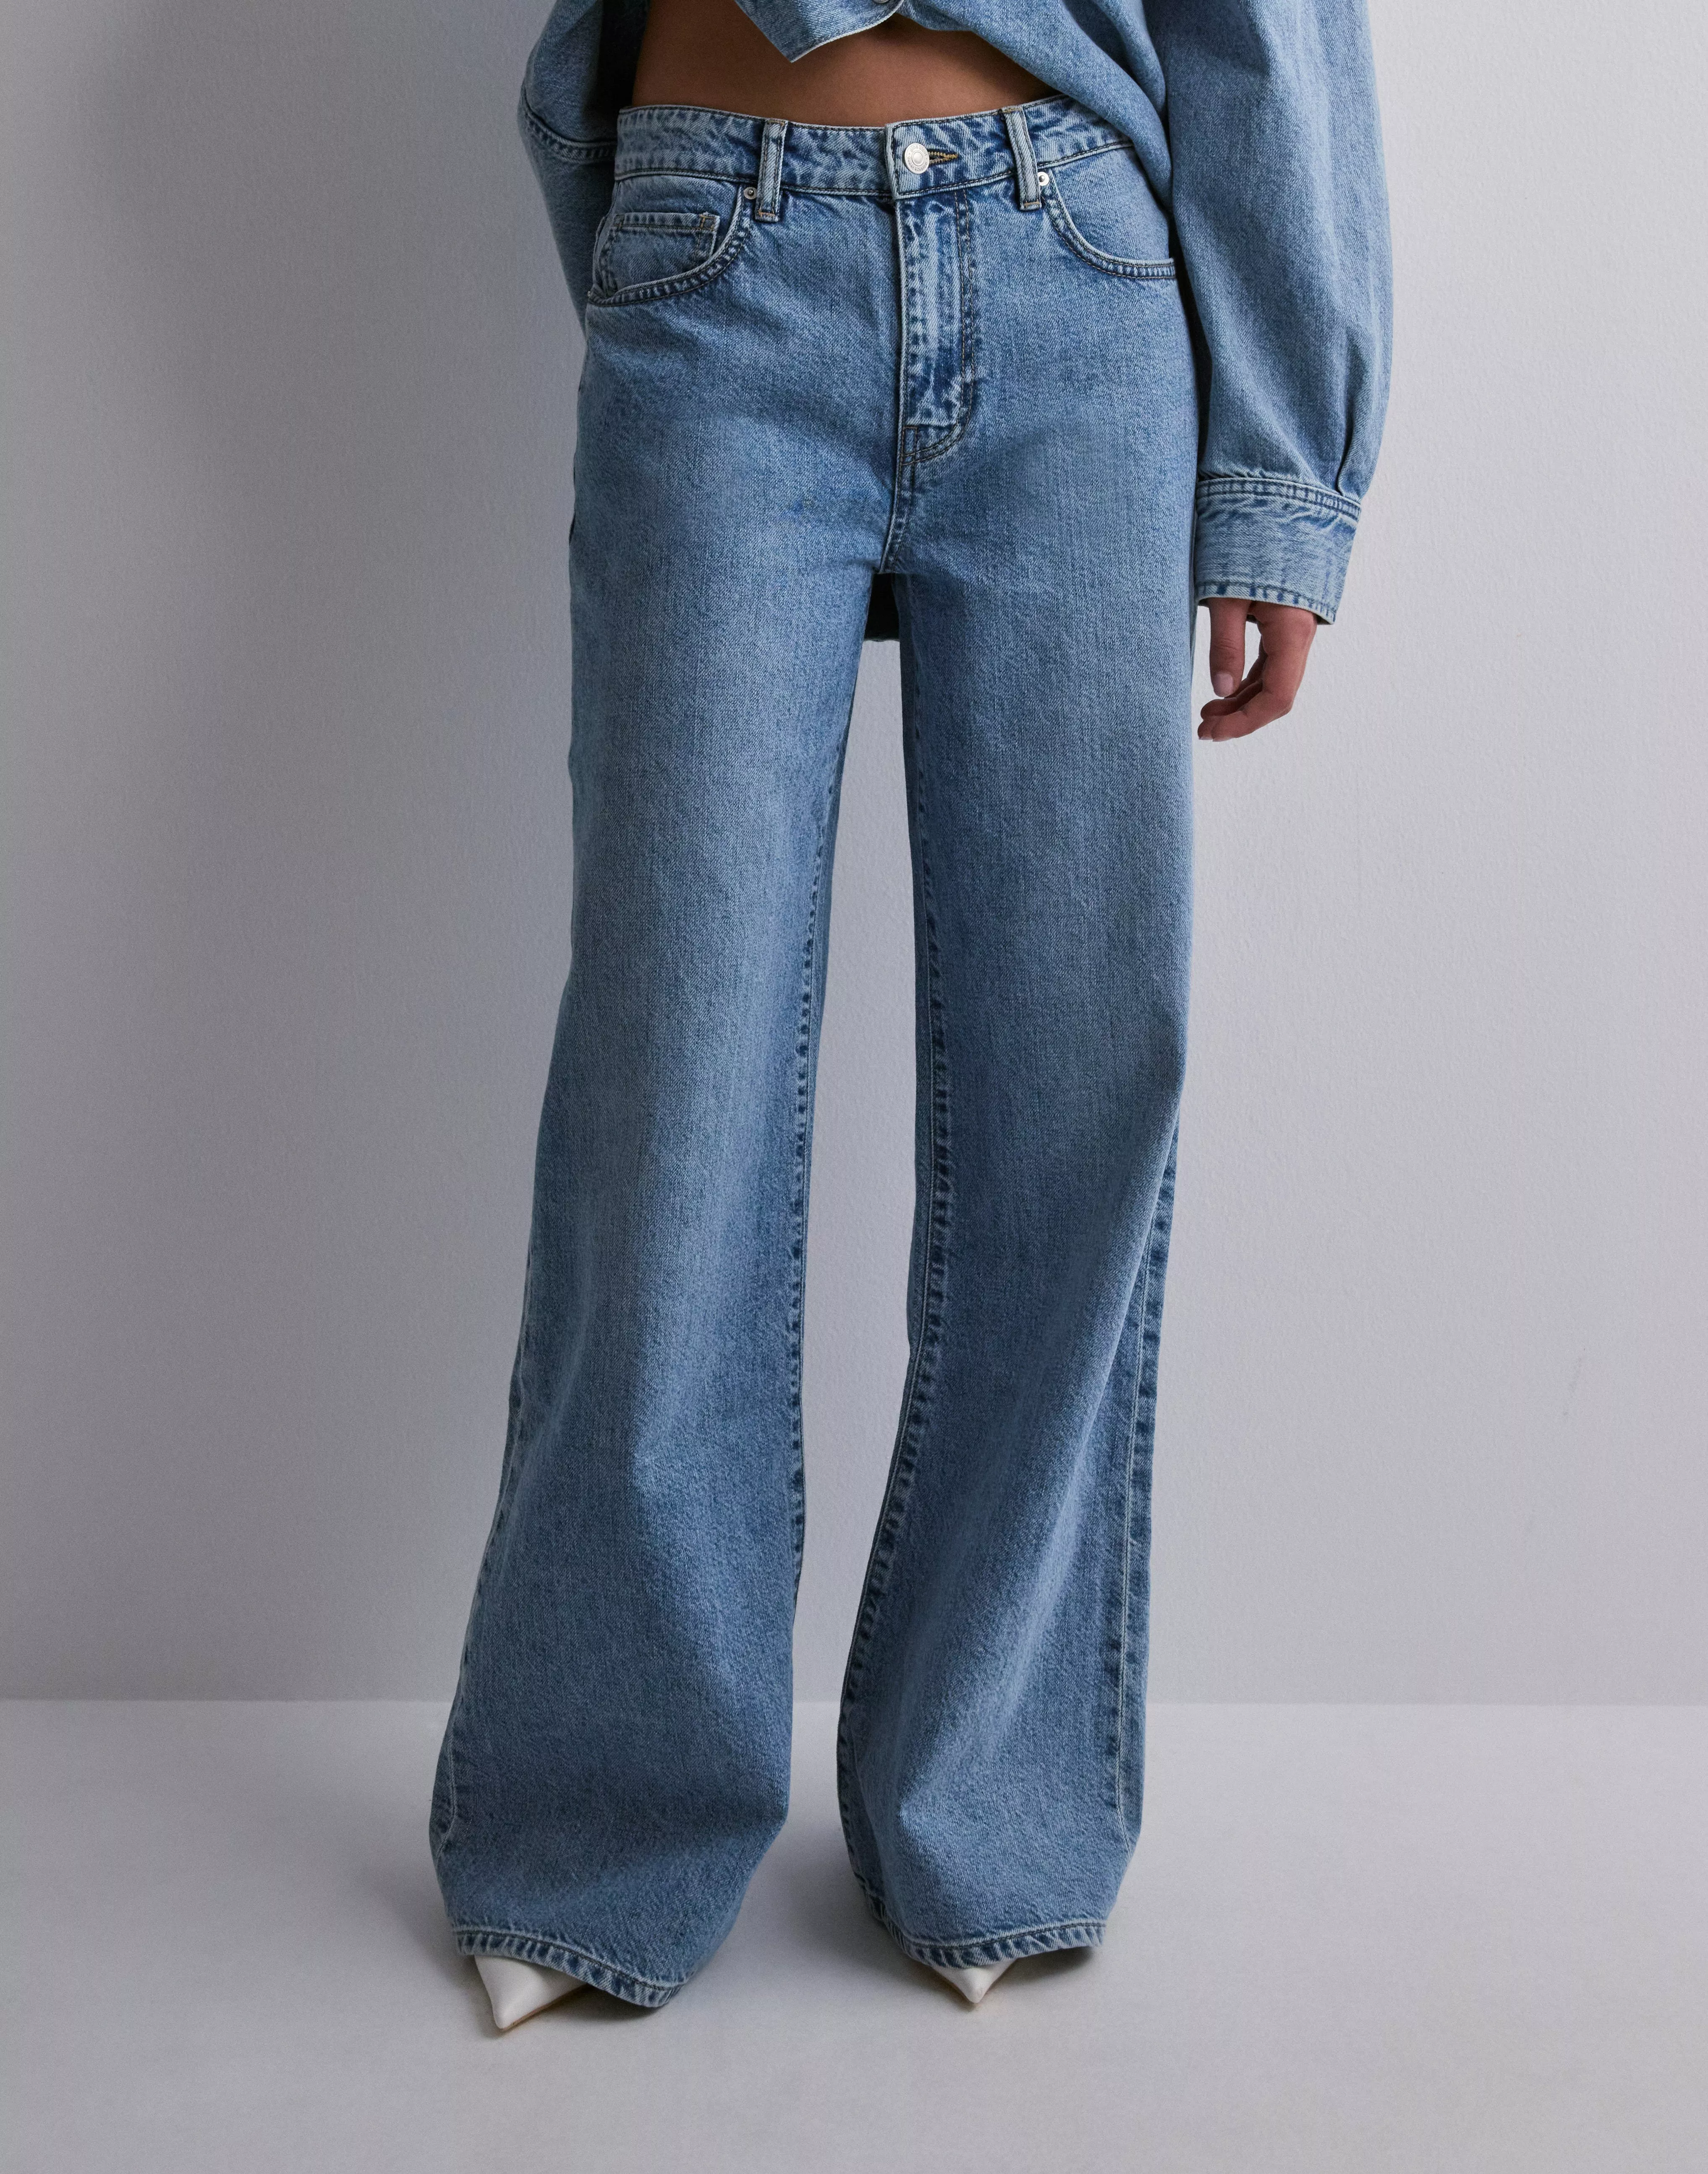 Tall Jeans for Women - Extra Long Jeans - Gina Tricot